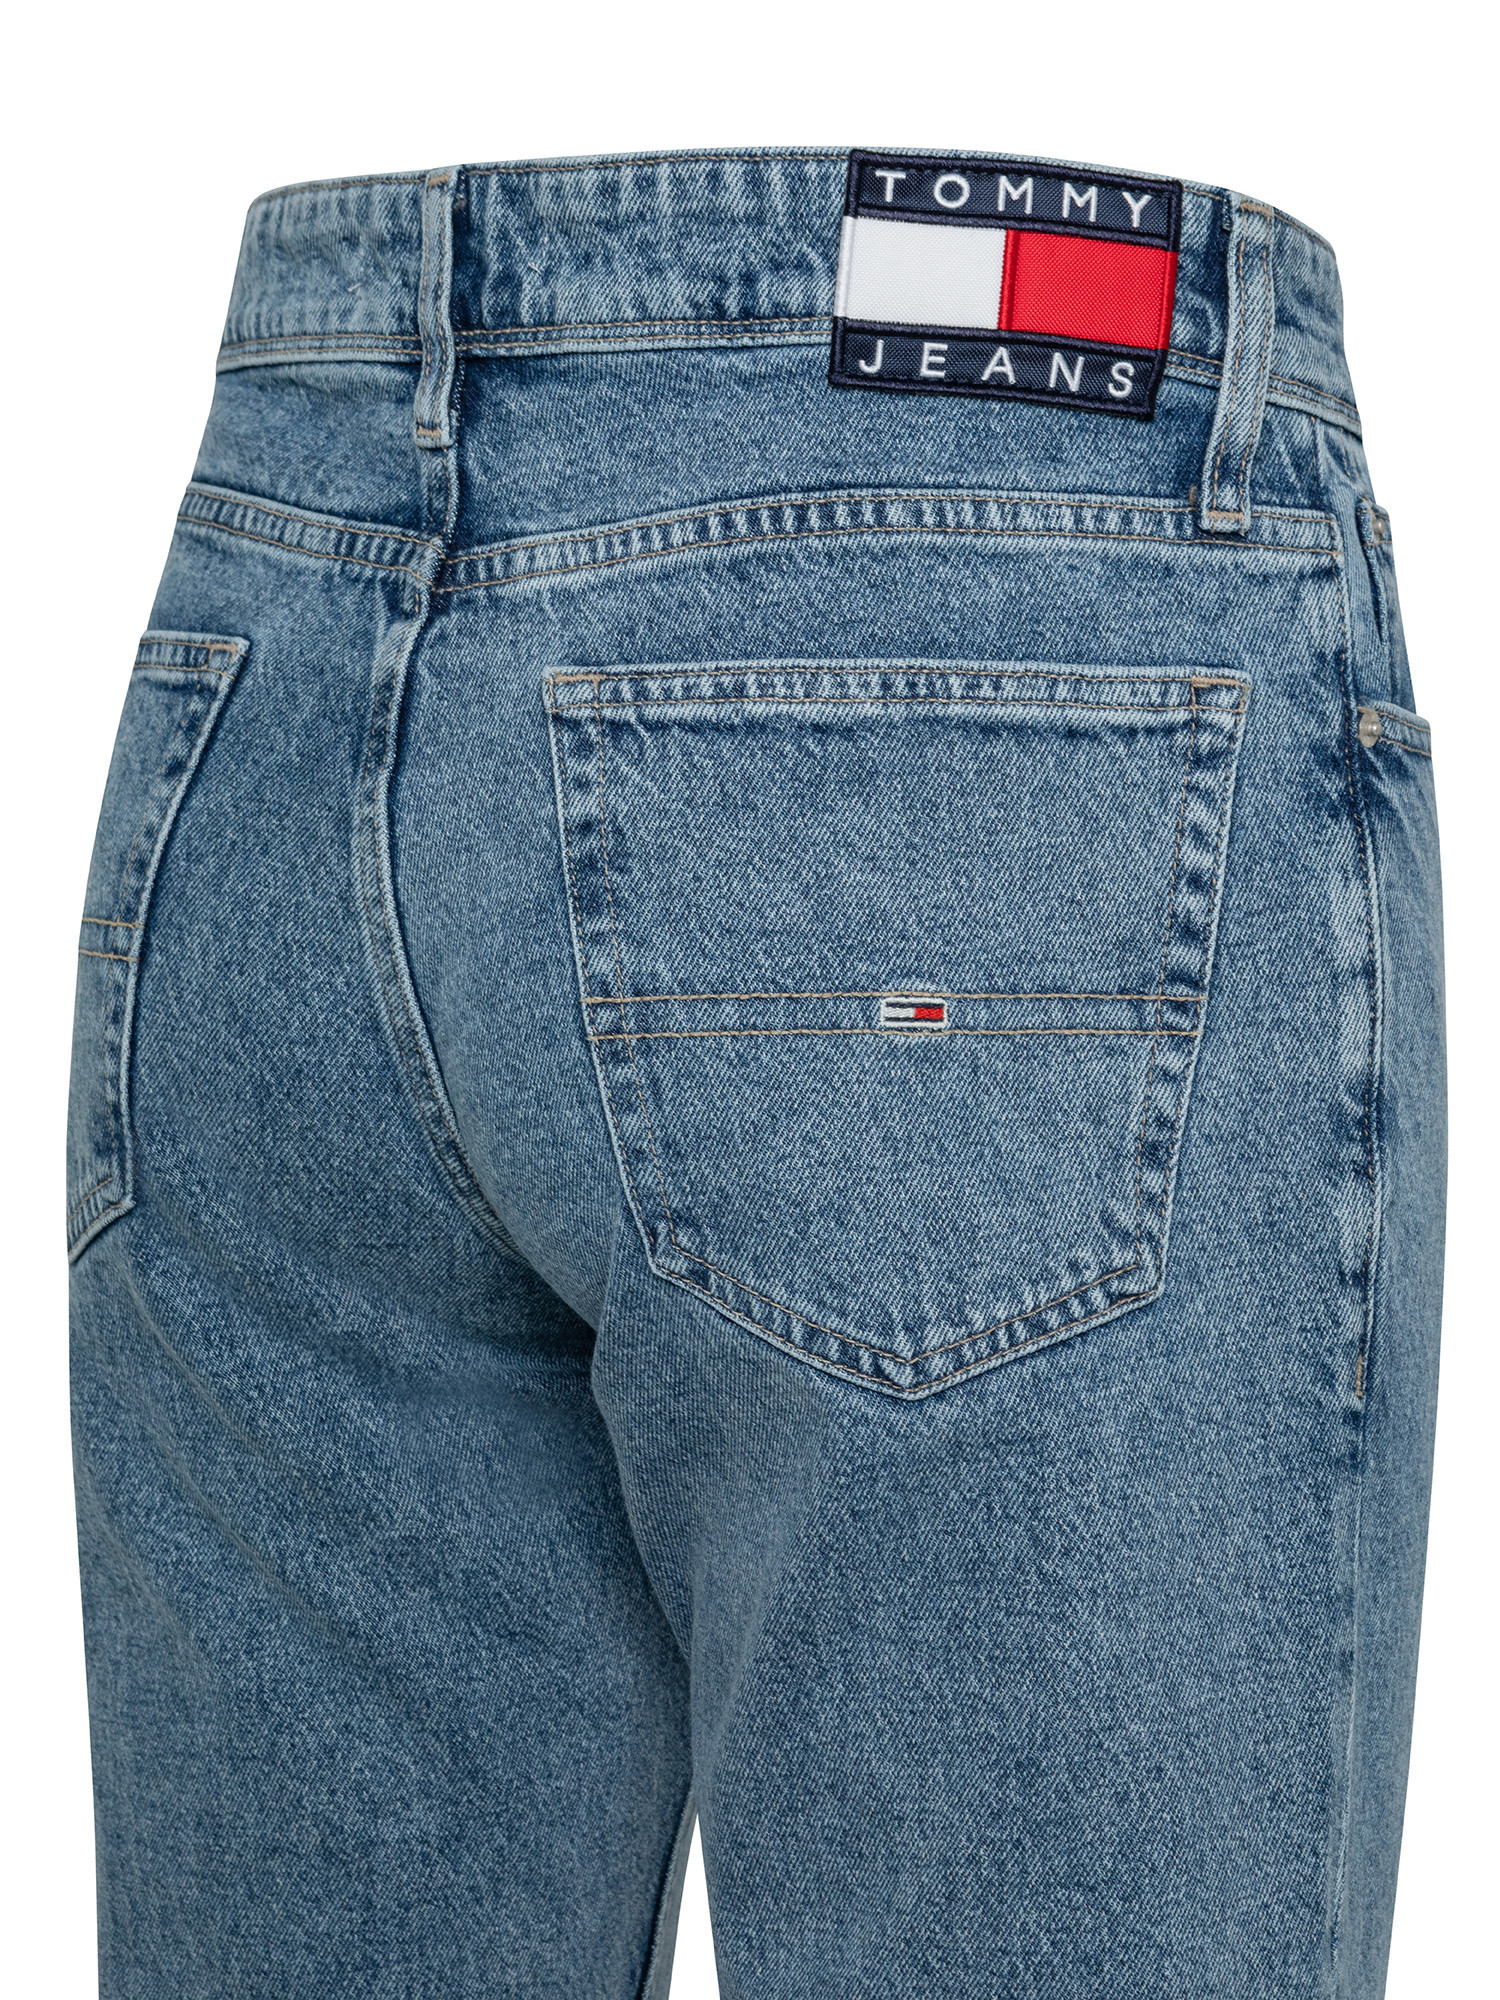 Tommy Jeans - Jeans a gamba dritta, Denim, large image number 2